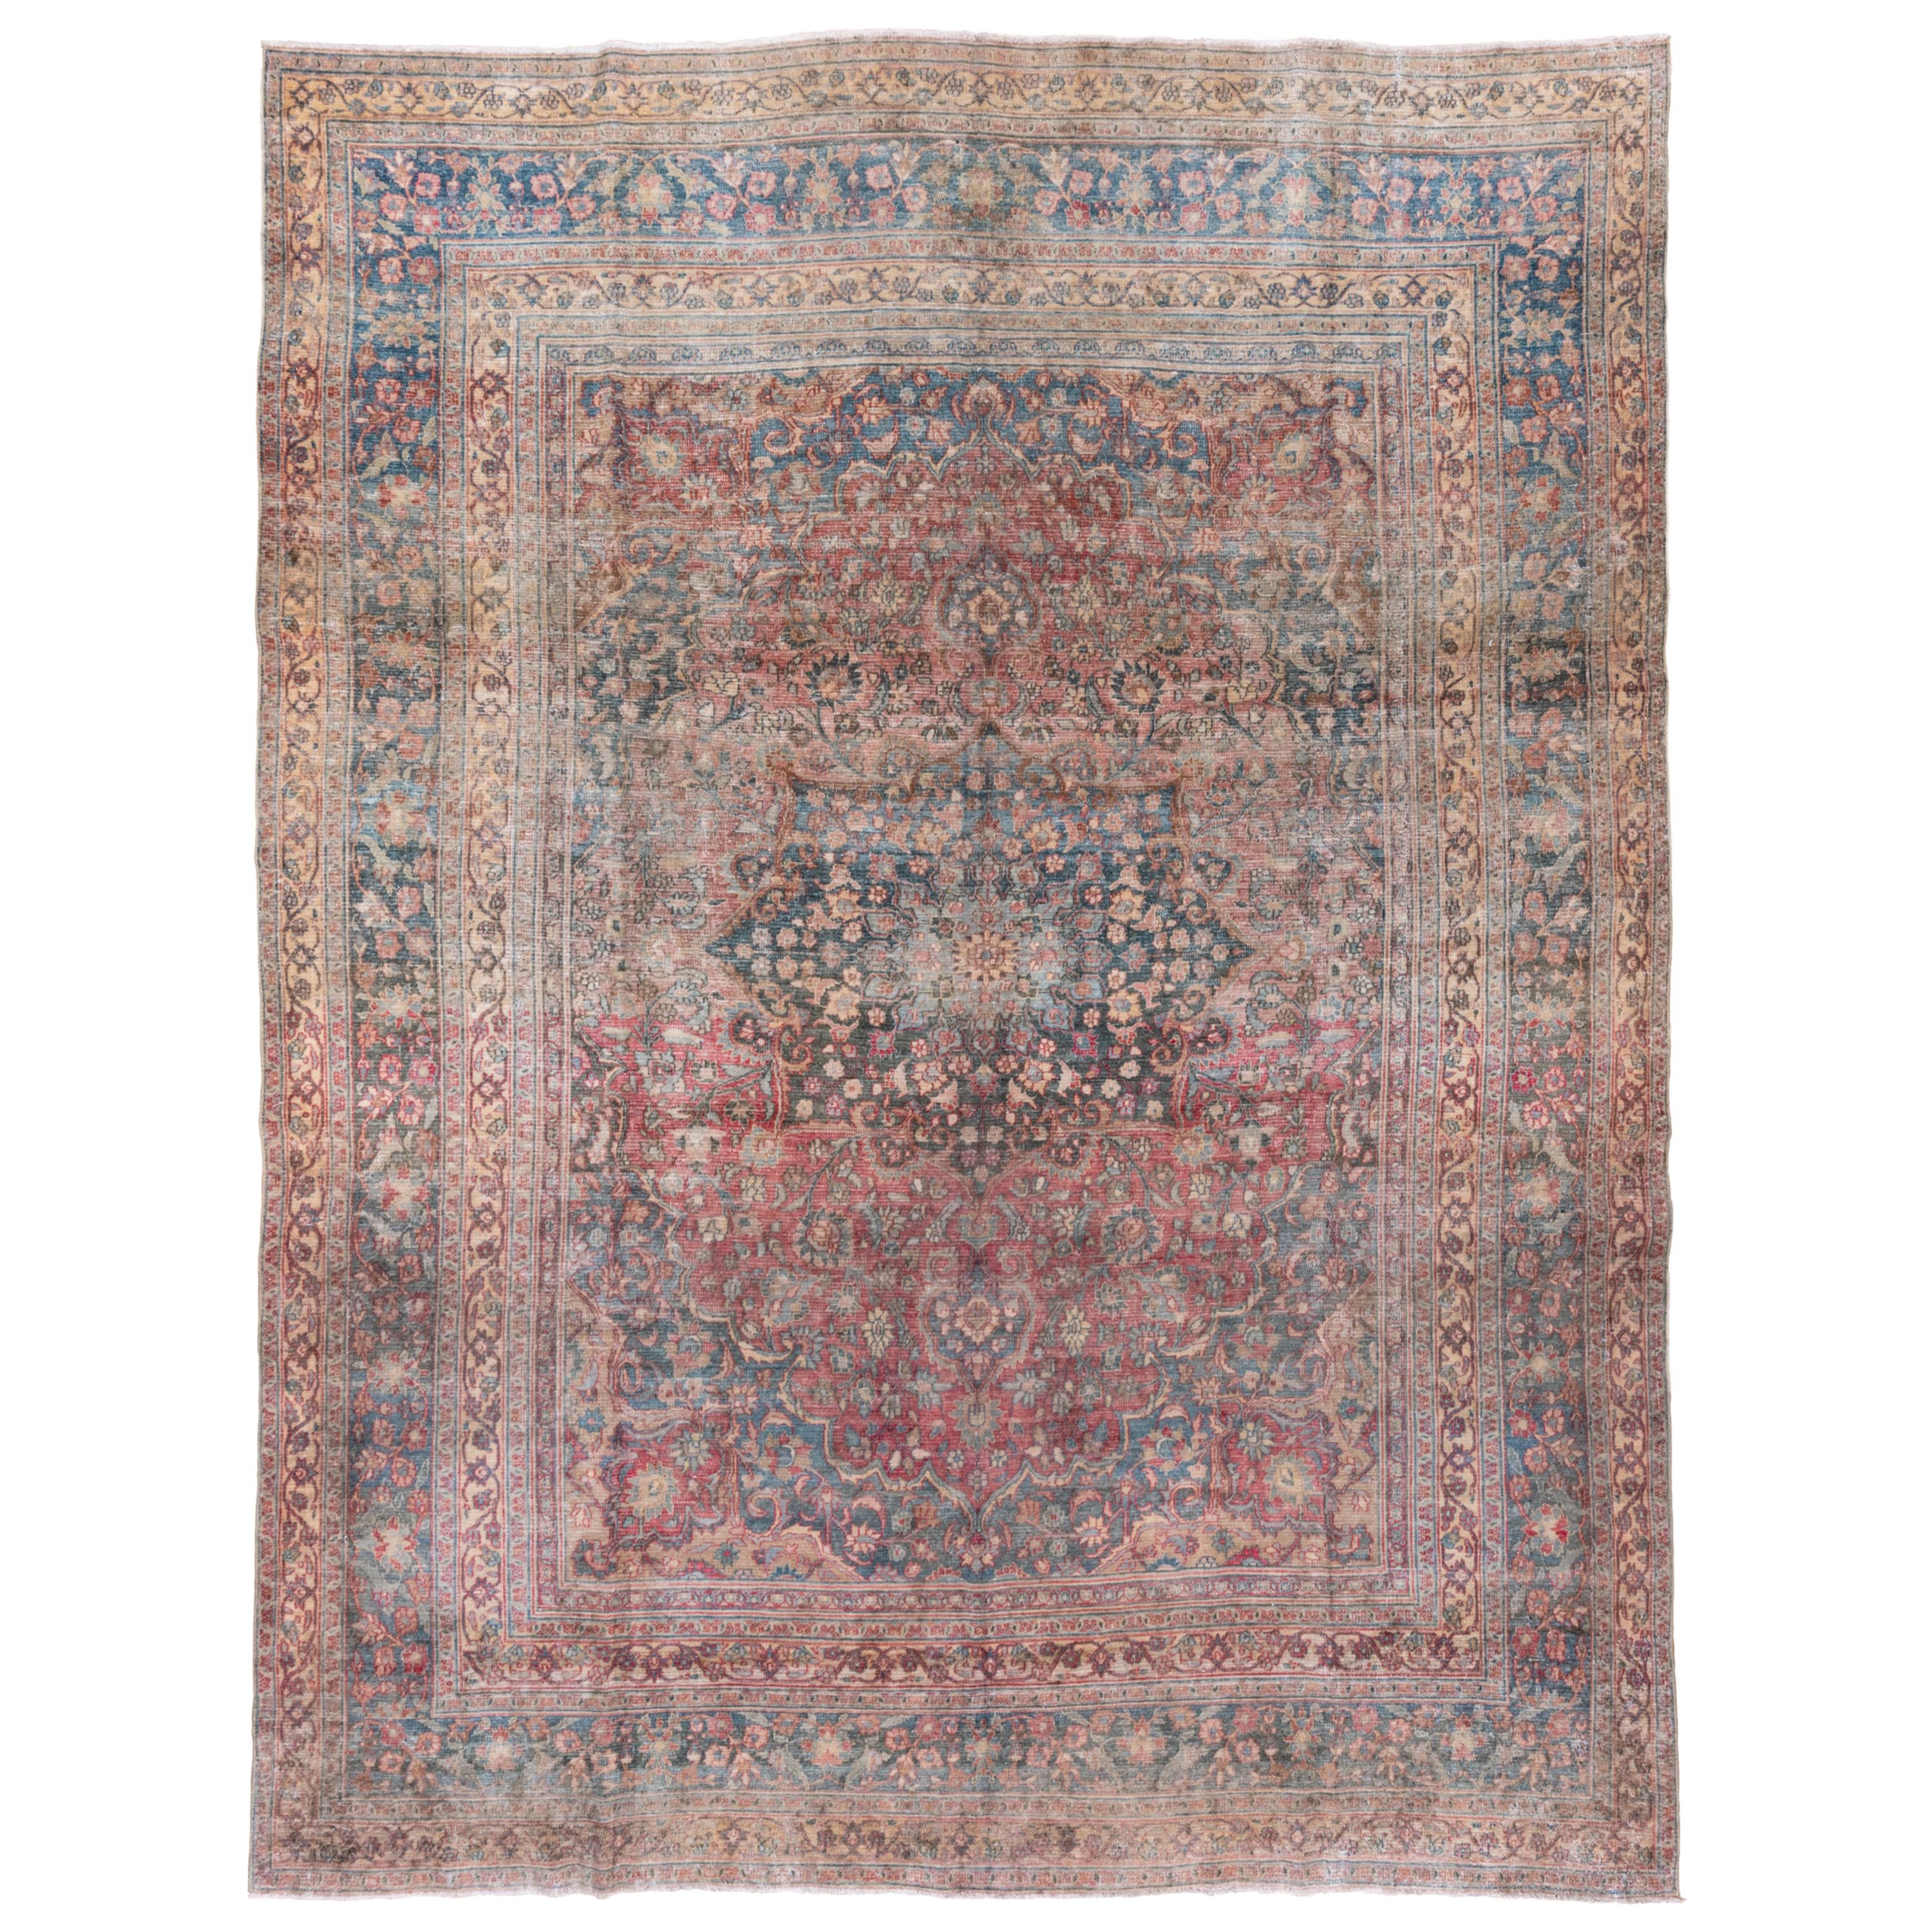 Shabby Chic Persian Khorassan Rug with Pink & Teal Tones, Circa 1930s For Sale